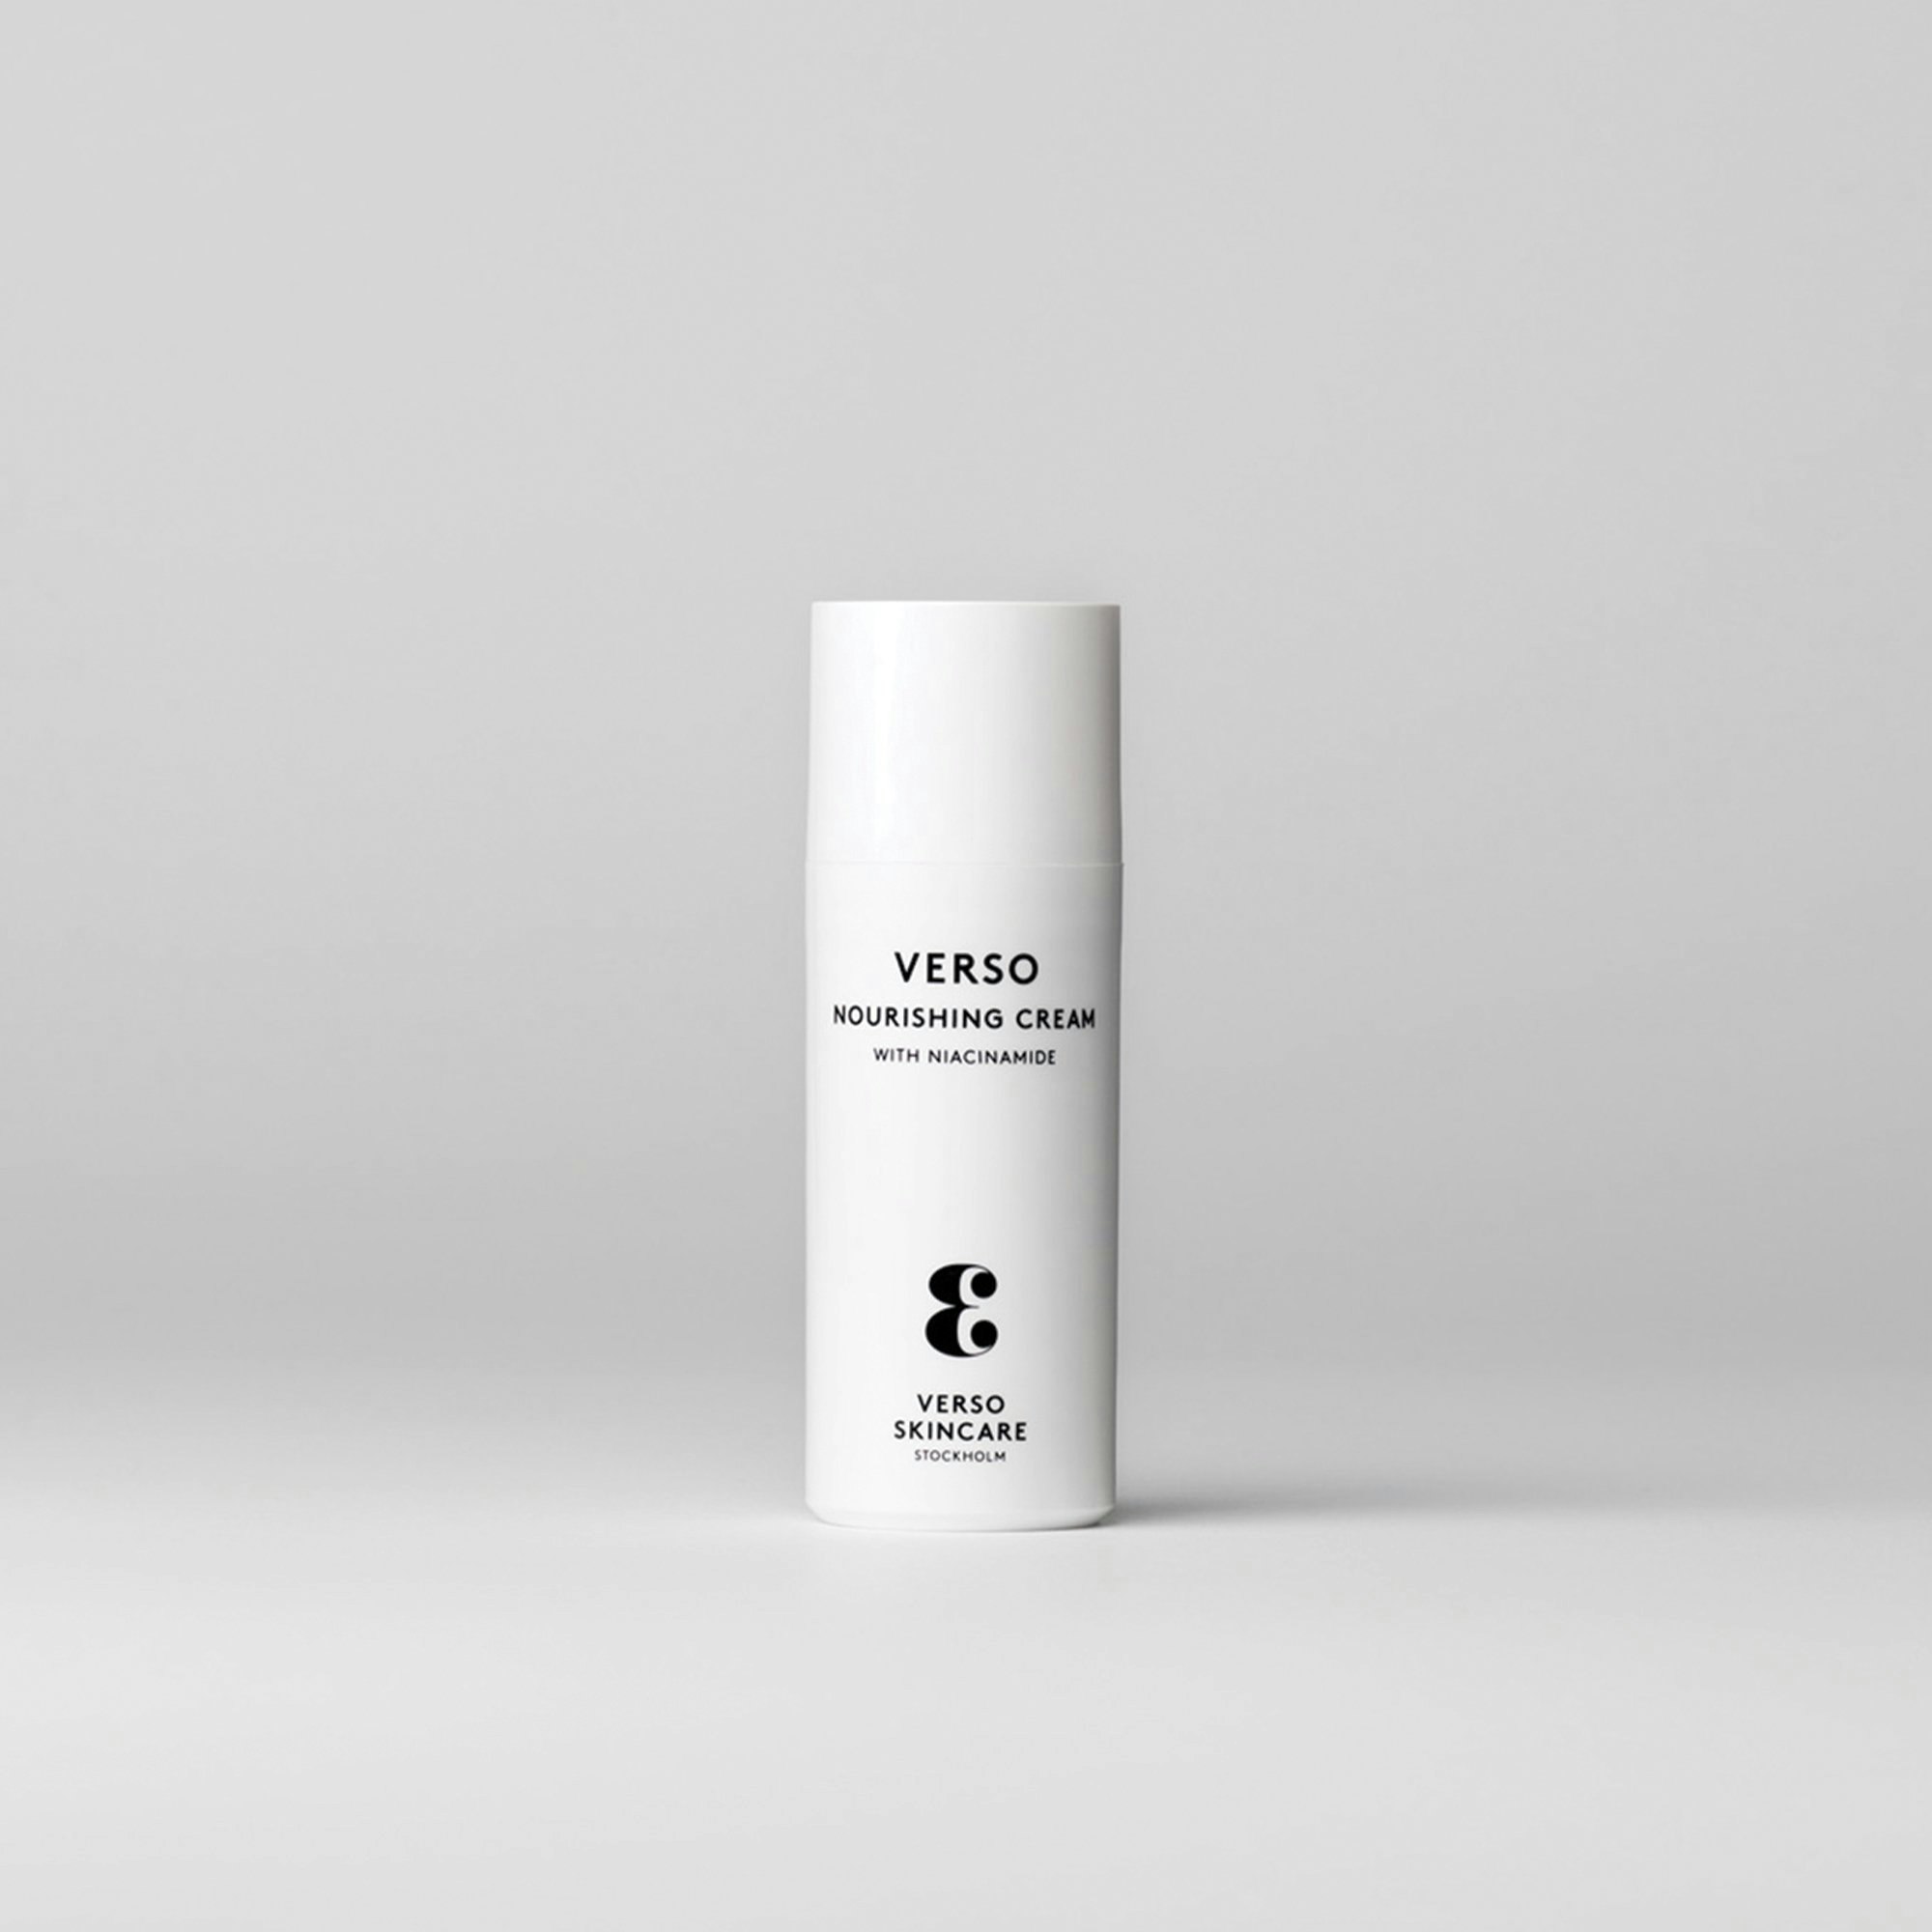 Verso Firming Routine (345 USD)